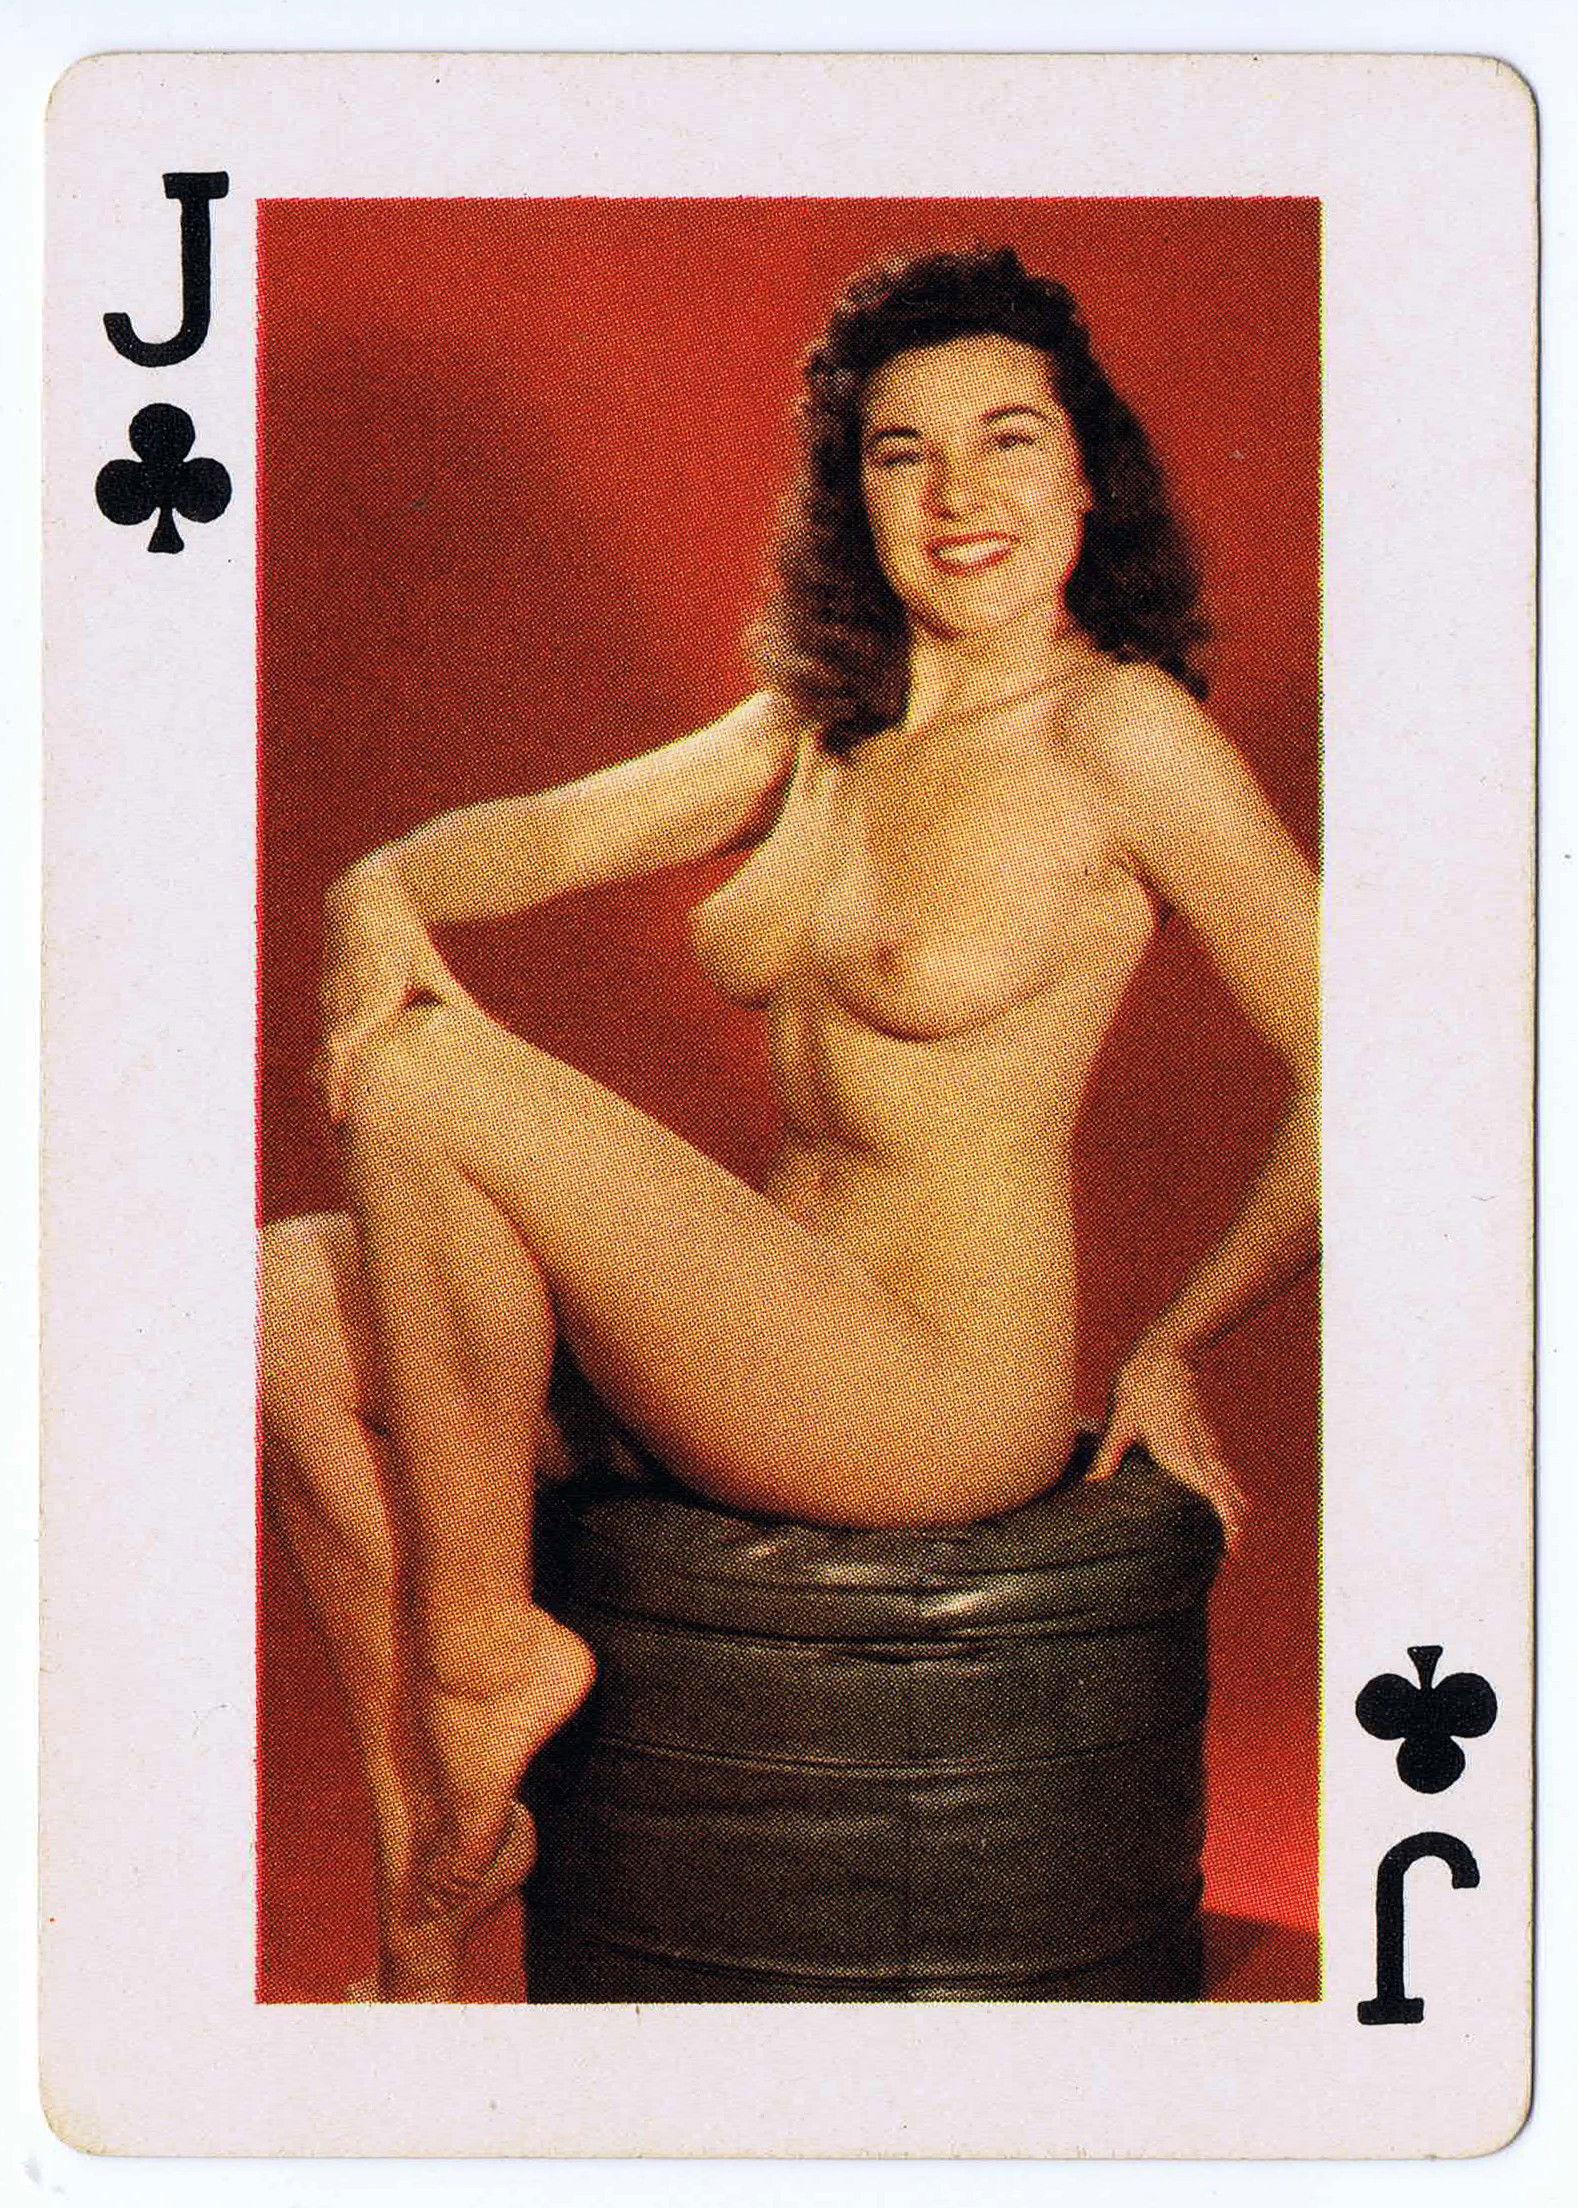 Photo by CRD Larson Art with the username @CRDLarson, who is a verified user,  September 5, 2019 at 9:55 AM and the text says '#Jack of #Clubs

From deck titled 'Fifty-Two Art Studies.' Made by the Novelties Manufacturing and Sales Corp, St. Louis, MO. Mid 1950s.

#photography #vintagenude #vintageerotica #1950s #retro #pinup #boudoir #burlesque #playingcards #glamour..'